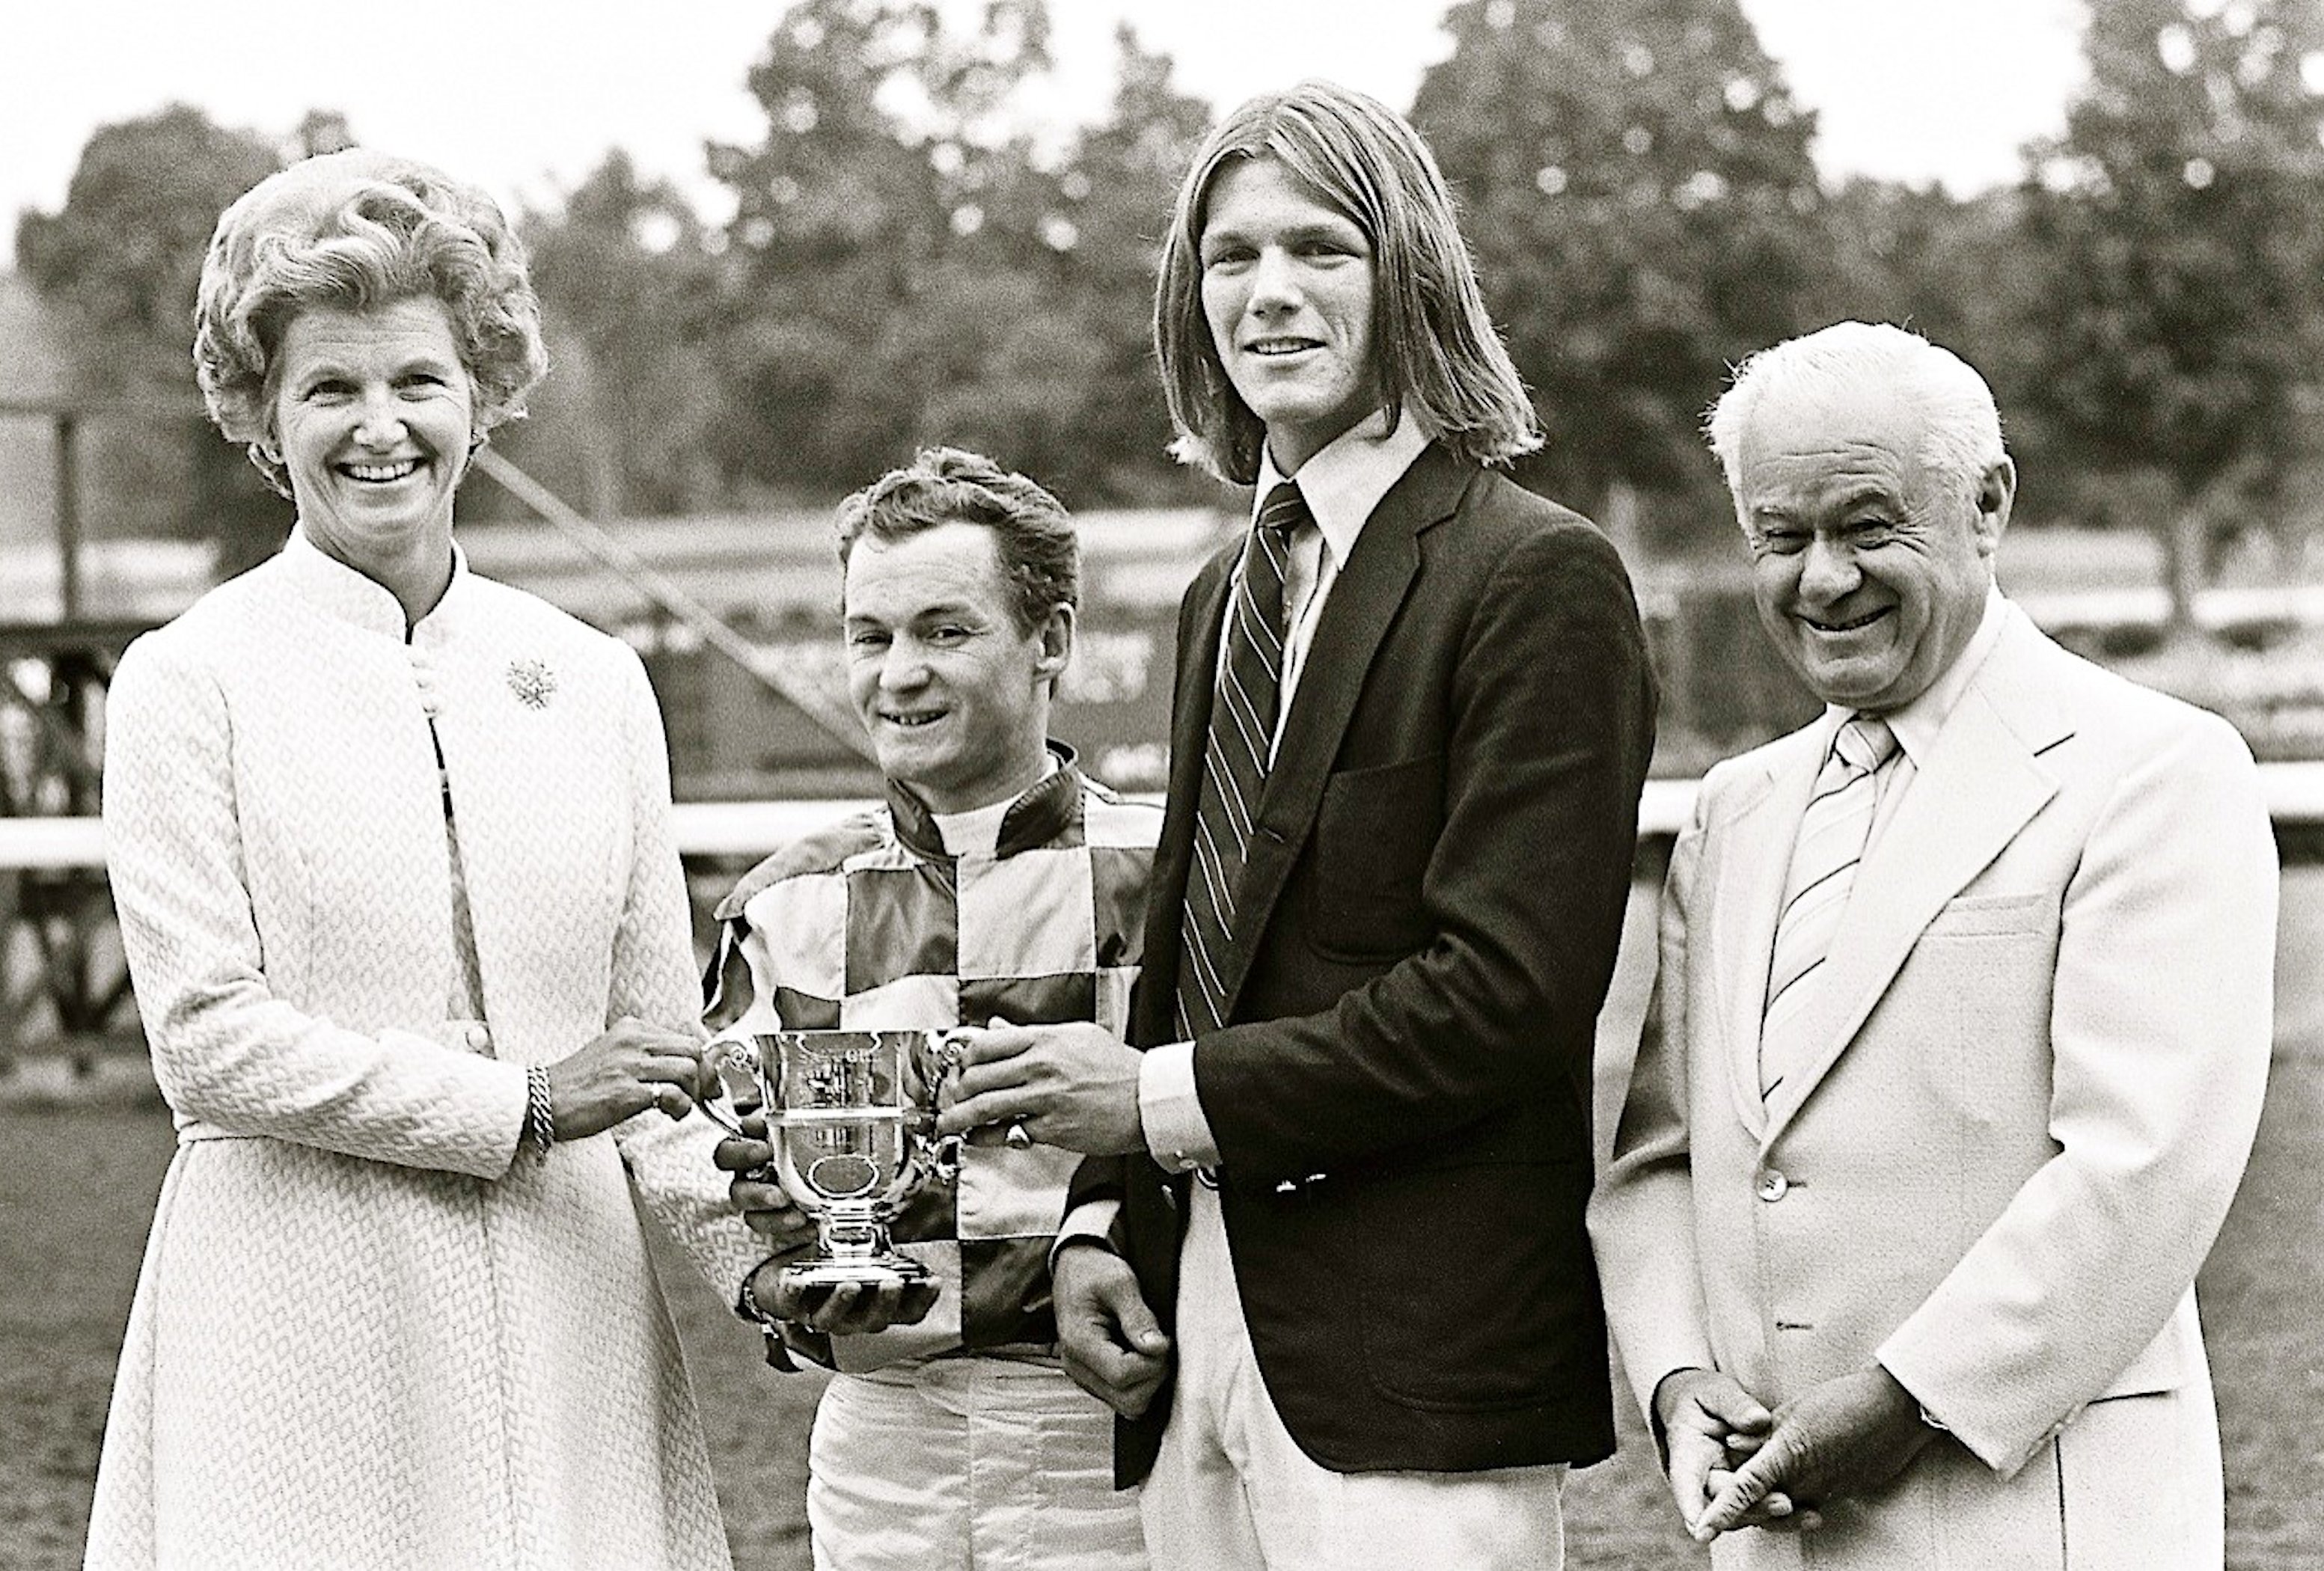 Penny Chenery, left, celebrates with Ron Turcotte, an unidentified individual, and Lucien Laurin, after Secretariat's victory in the 1972 Sanford Stakes at Saratoga (Douglas Lees)